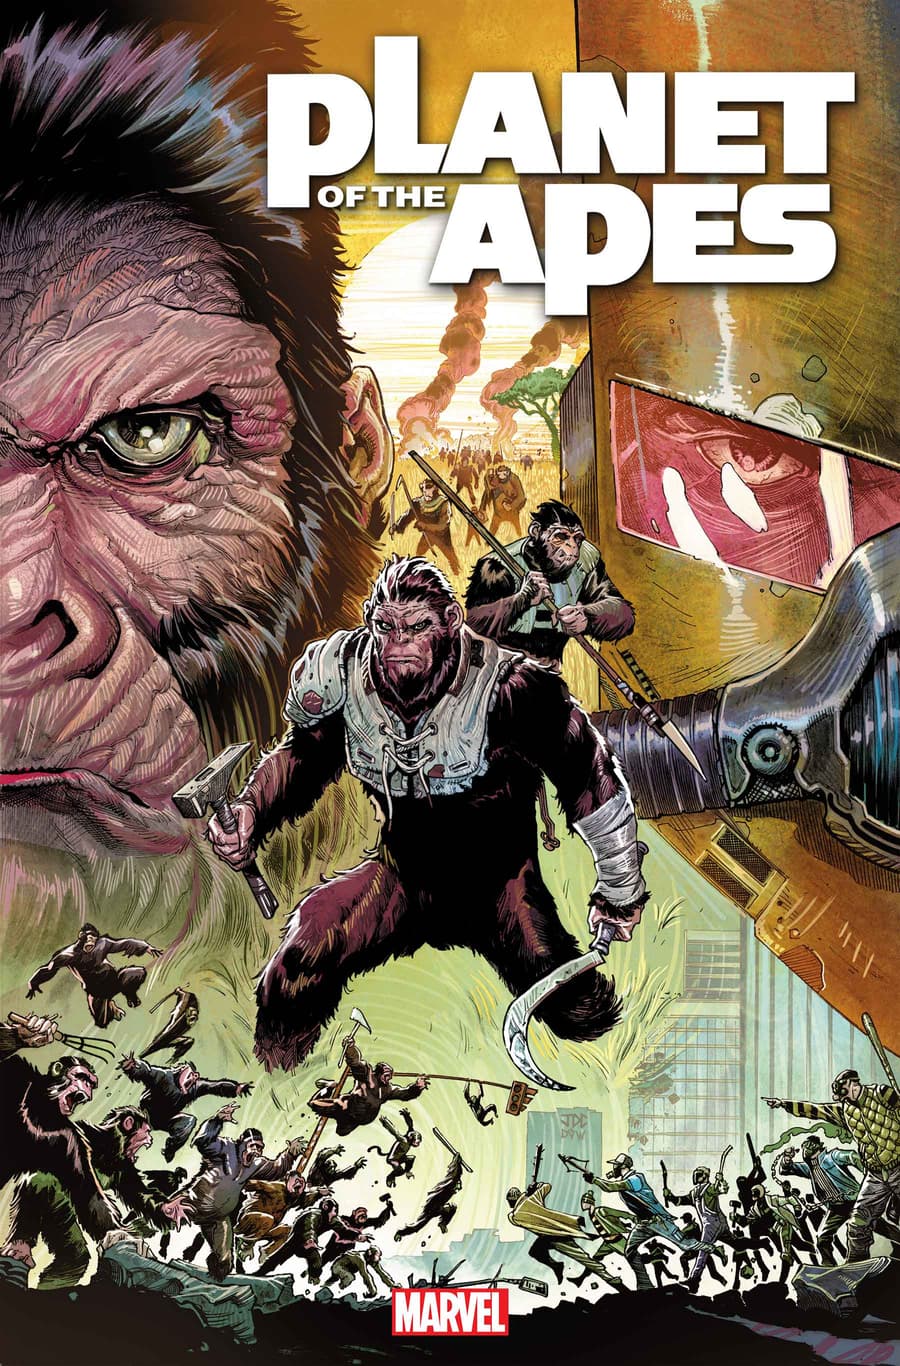 PLANET OF THE APES #1 cover by Joshua Cassara